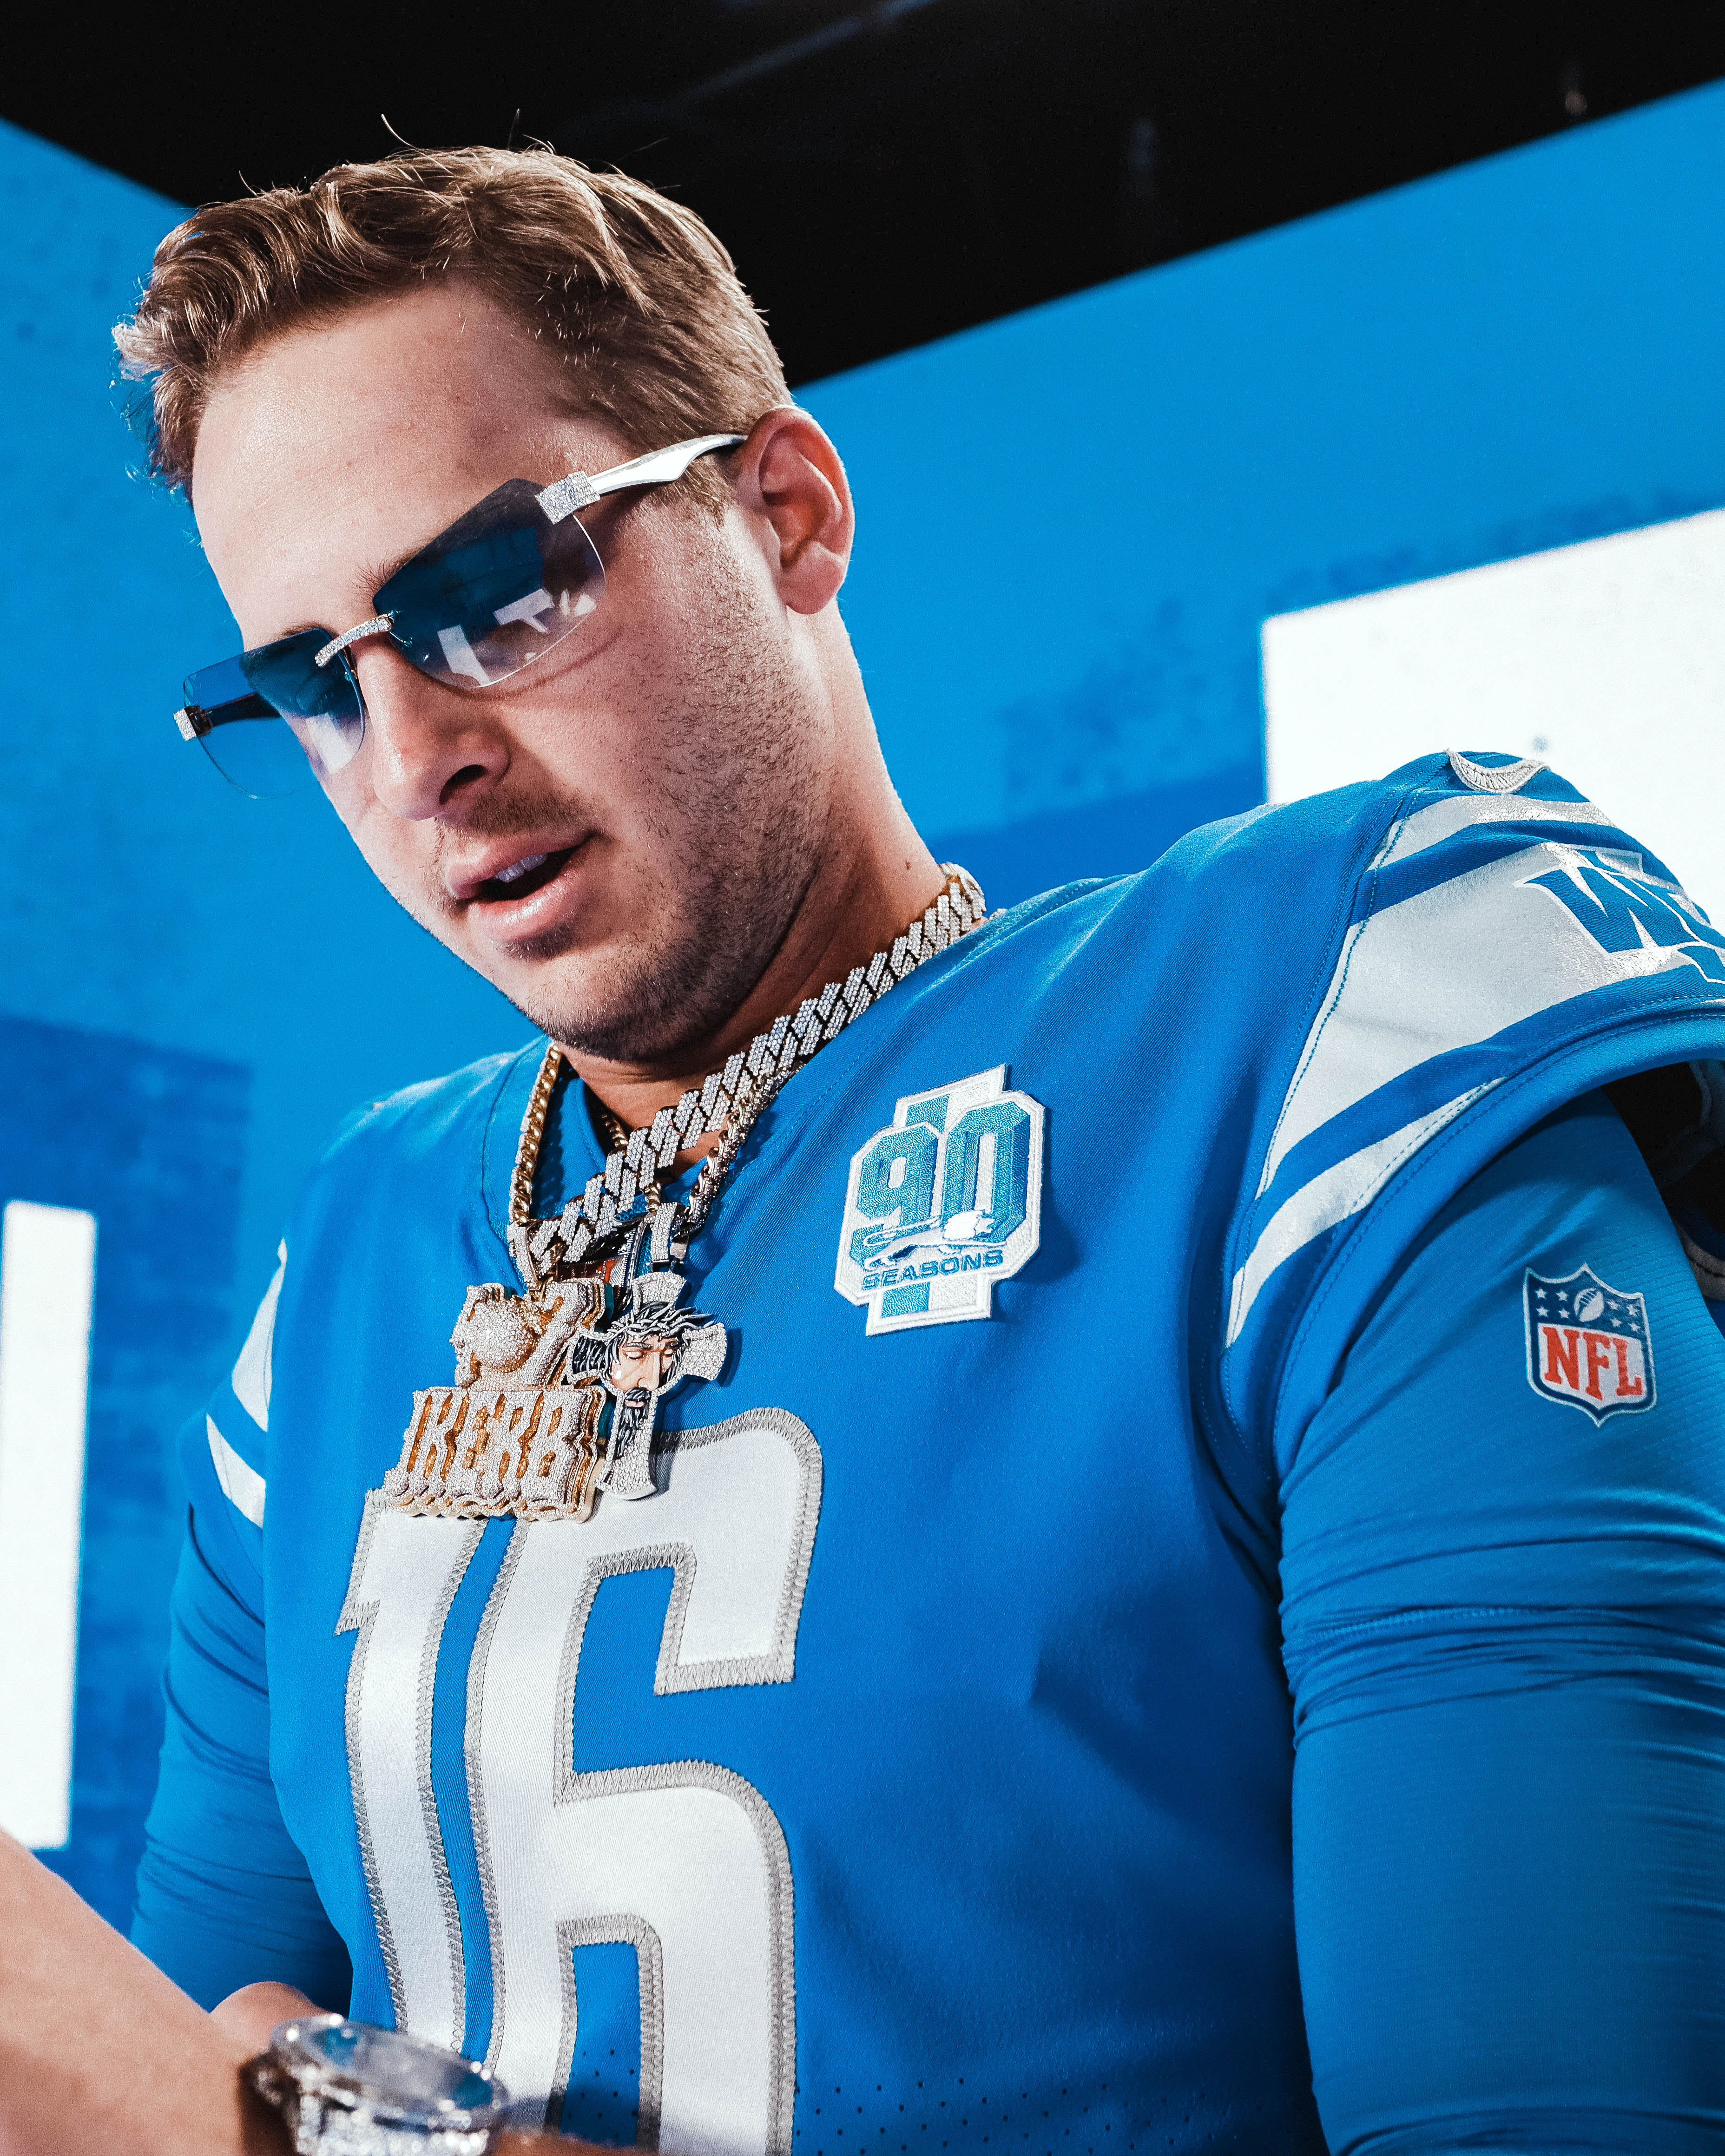 Jared Goff of the Detroit Lions in a jersey, jewelry and sunglasses.